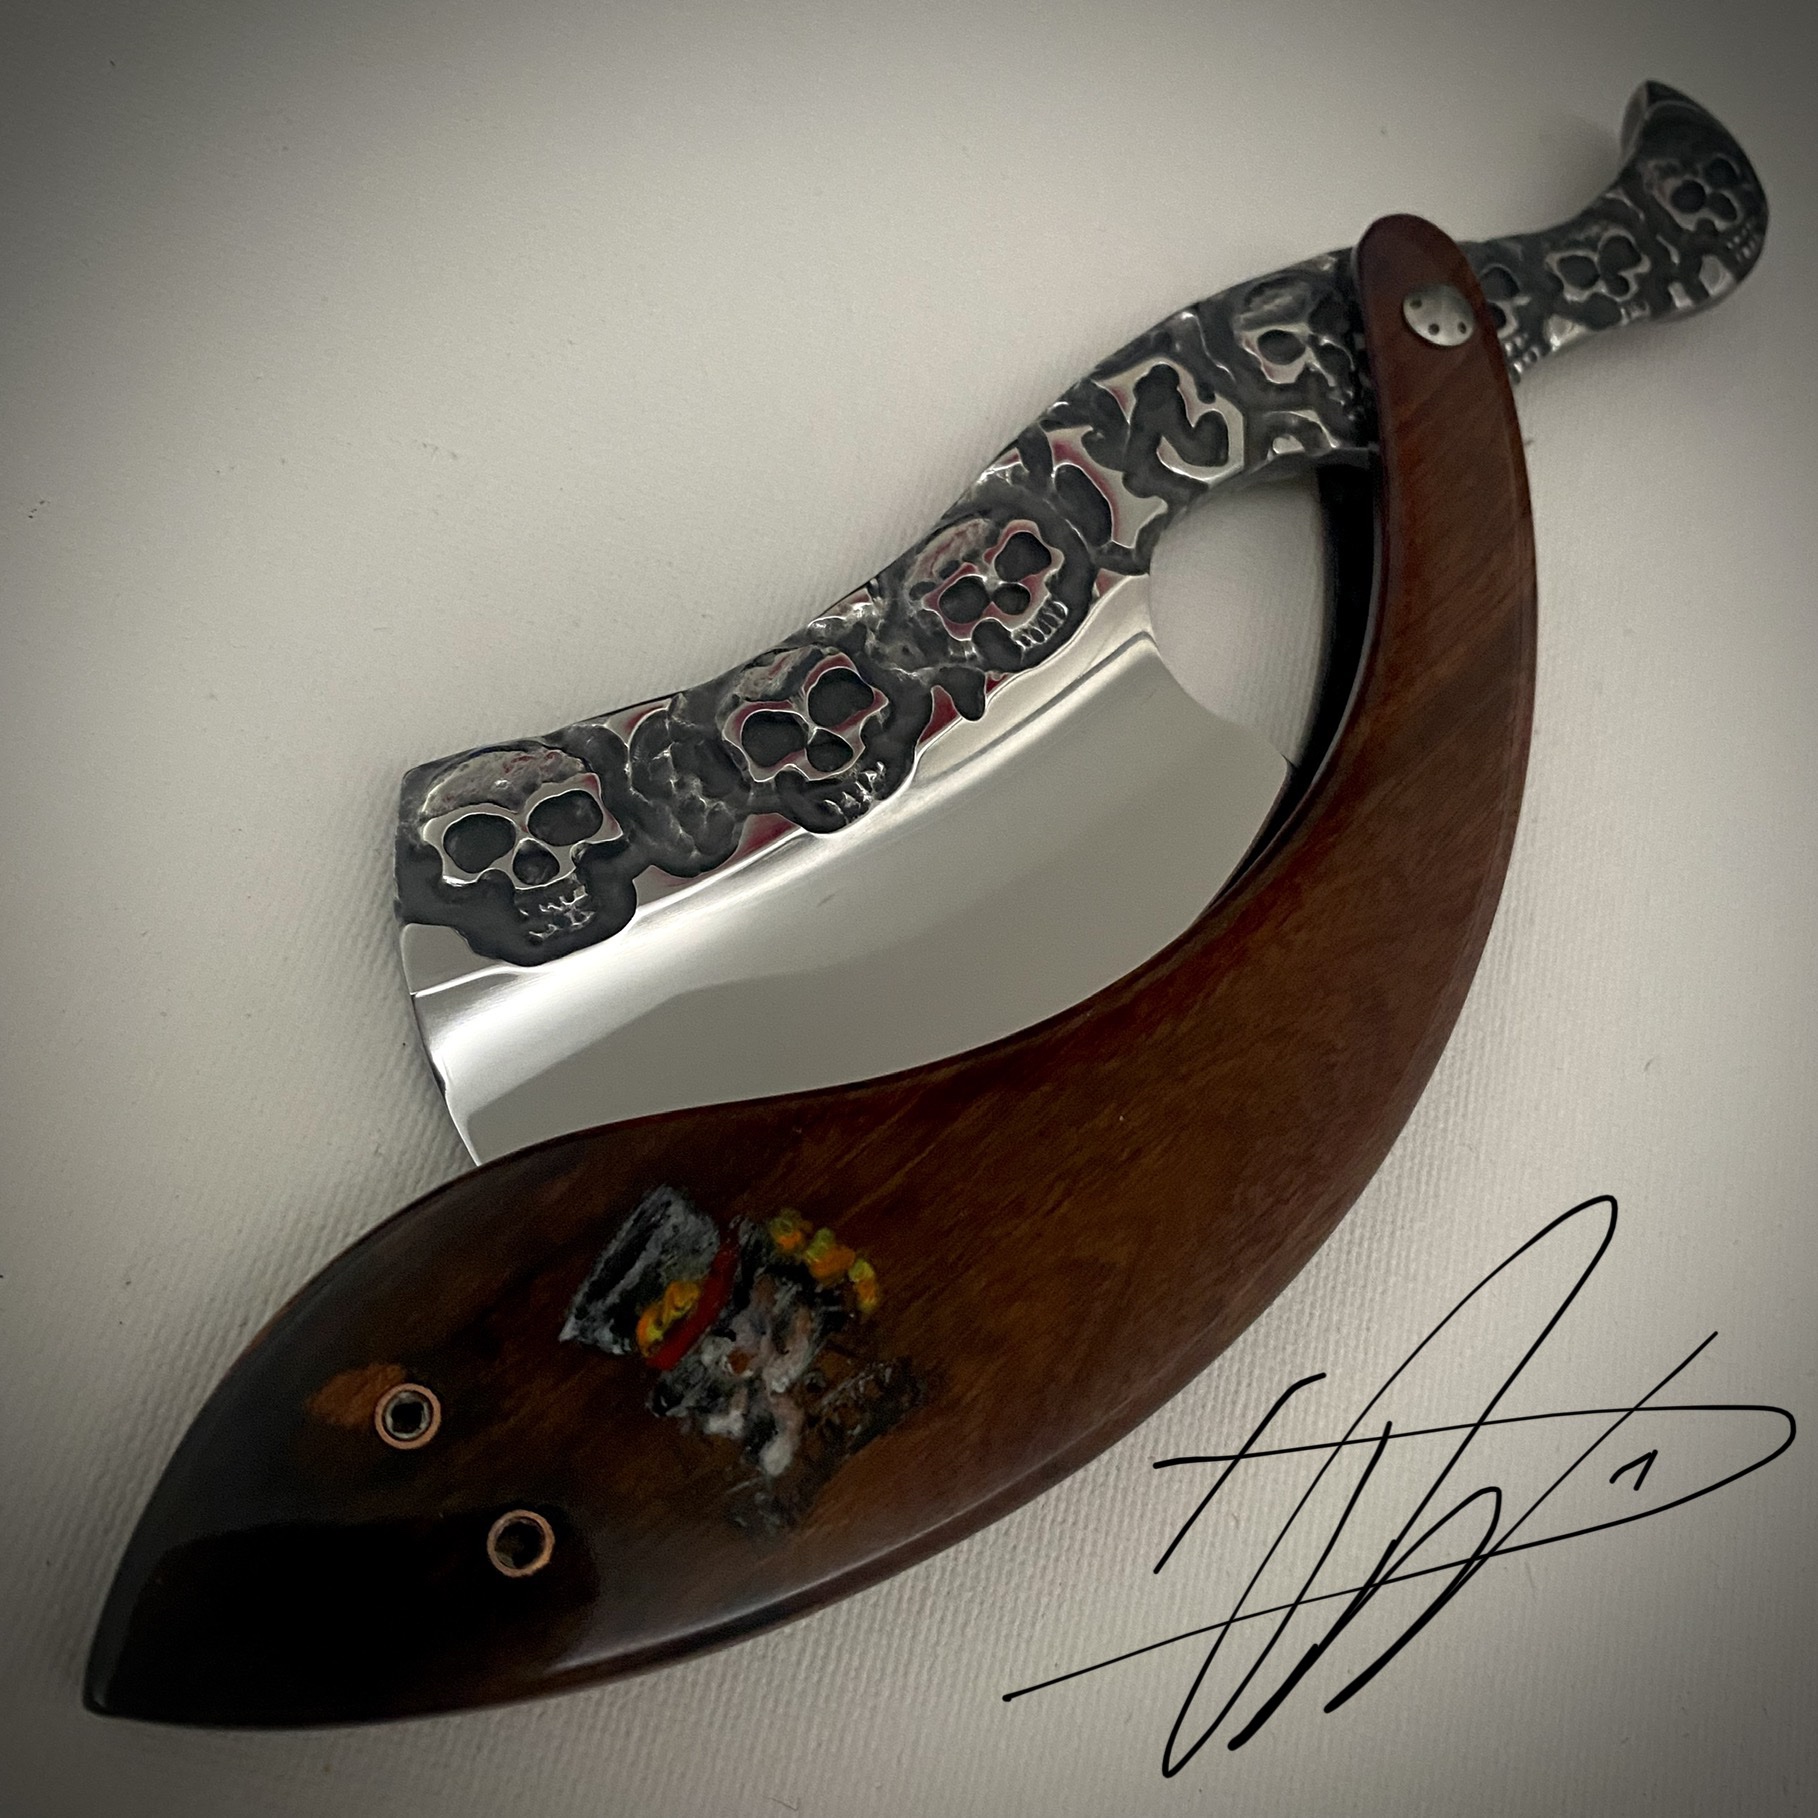 Woolfblades 332 Custom Made in a RWL34 and the scales are made a solid wood with carbon fibre inlays